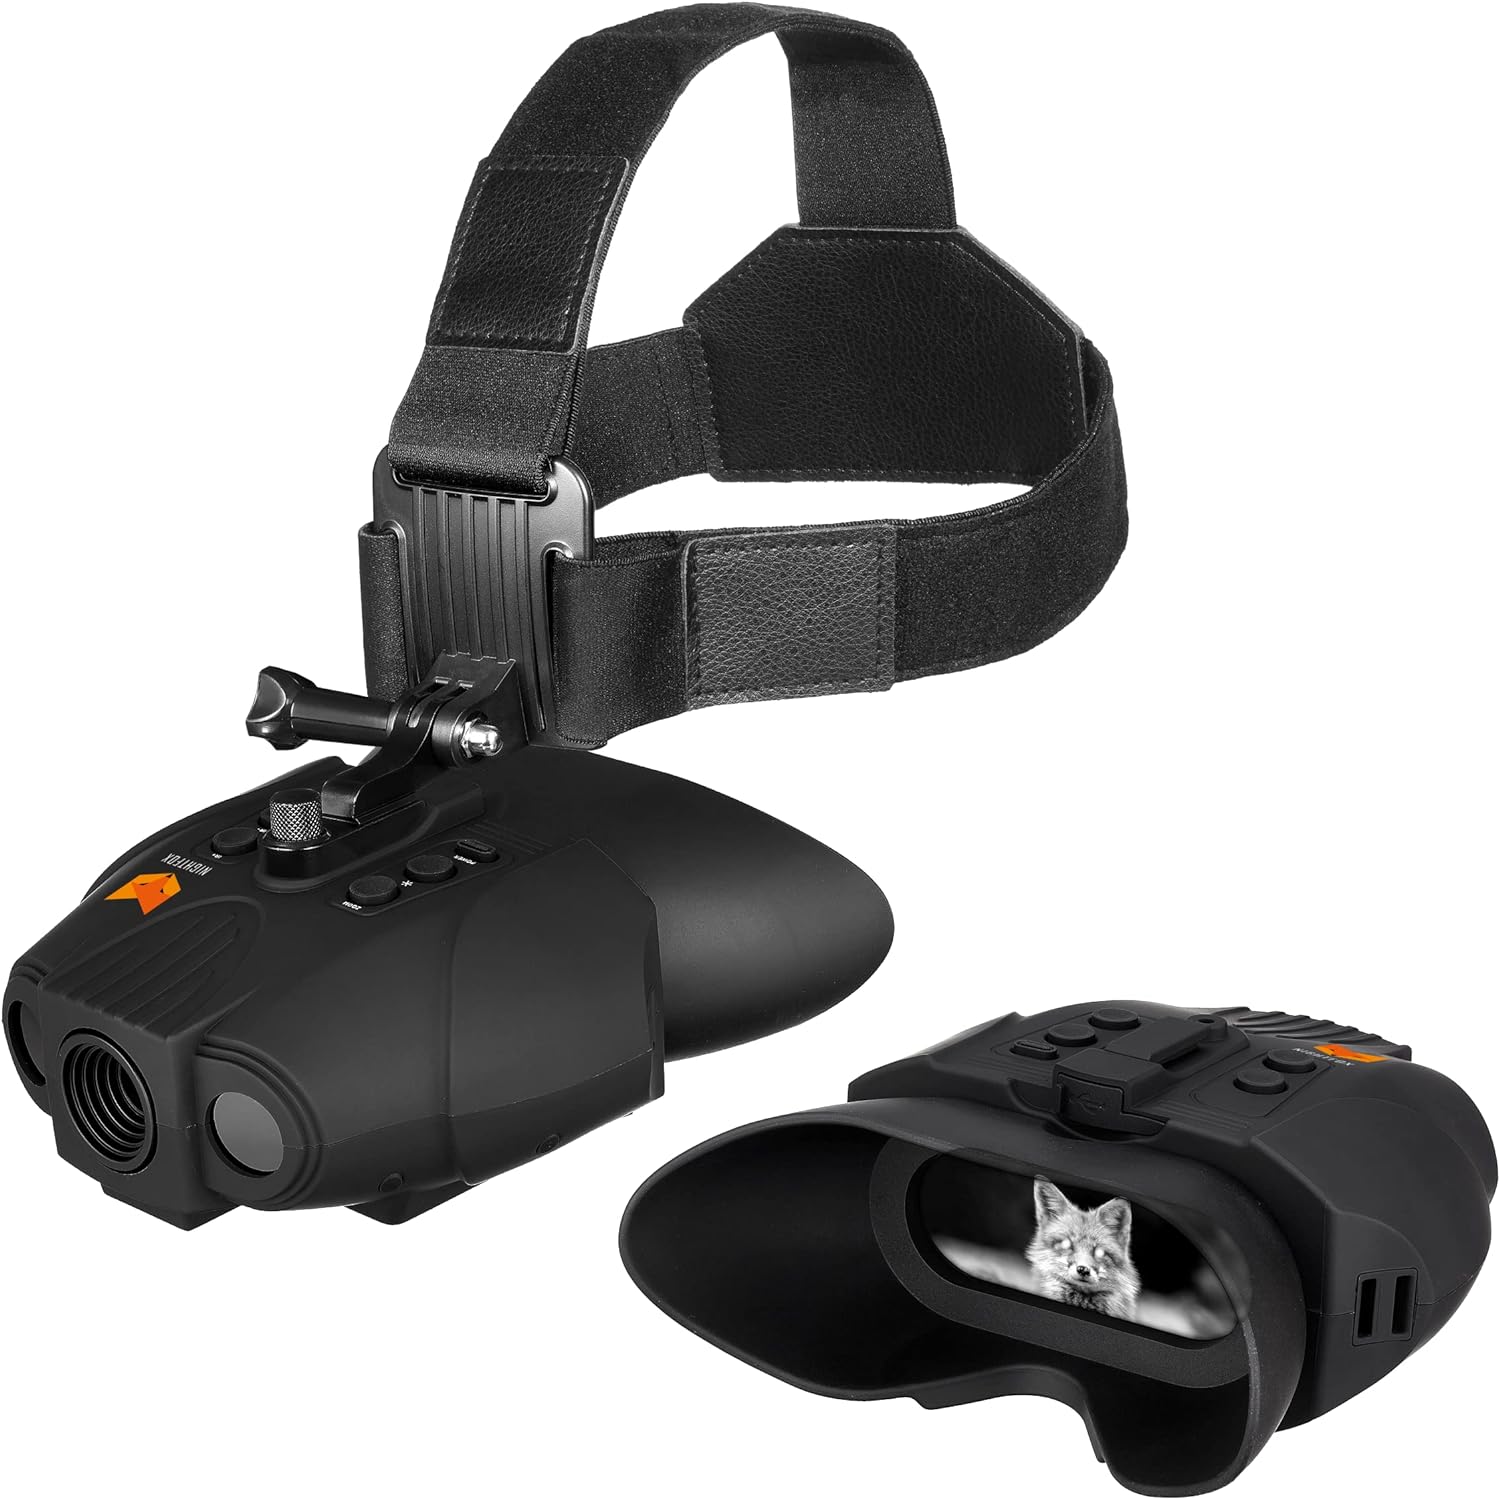 Nightfox Swift USB Rechargeable Night Vision Goggles